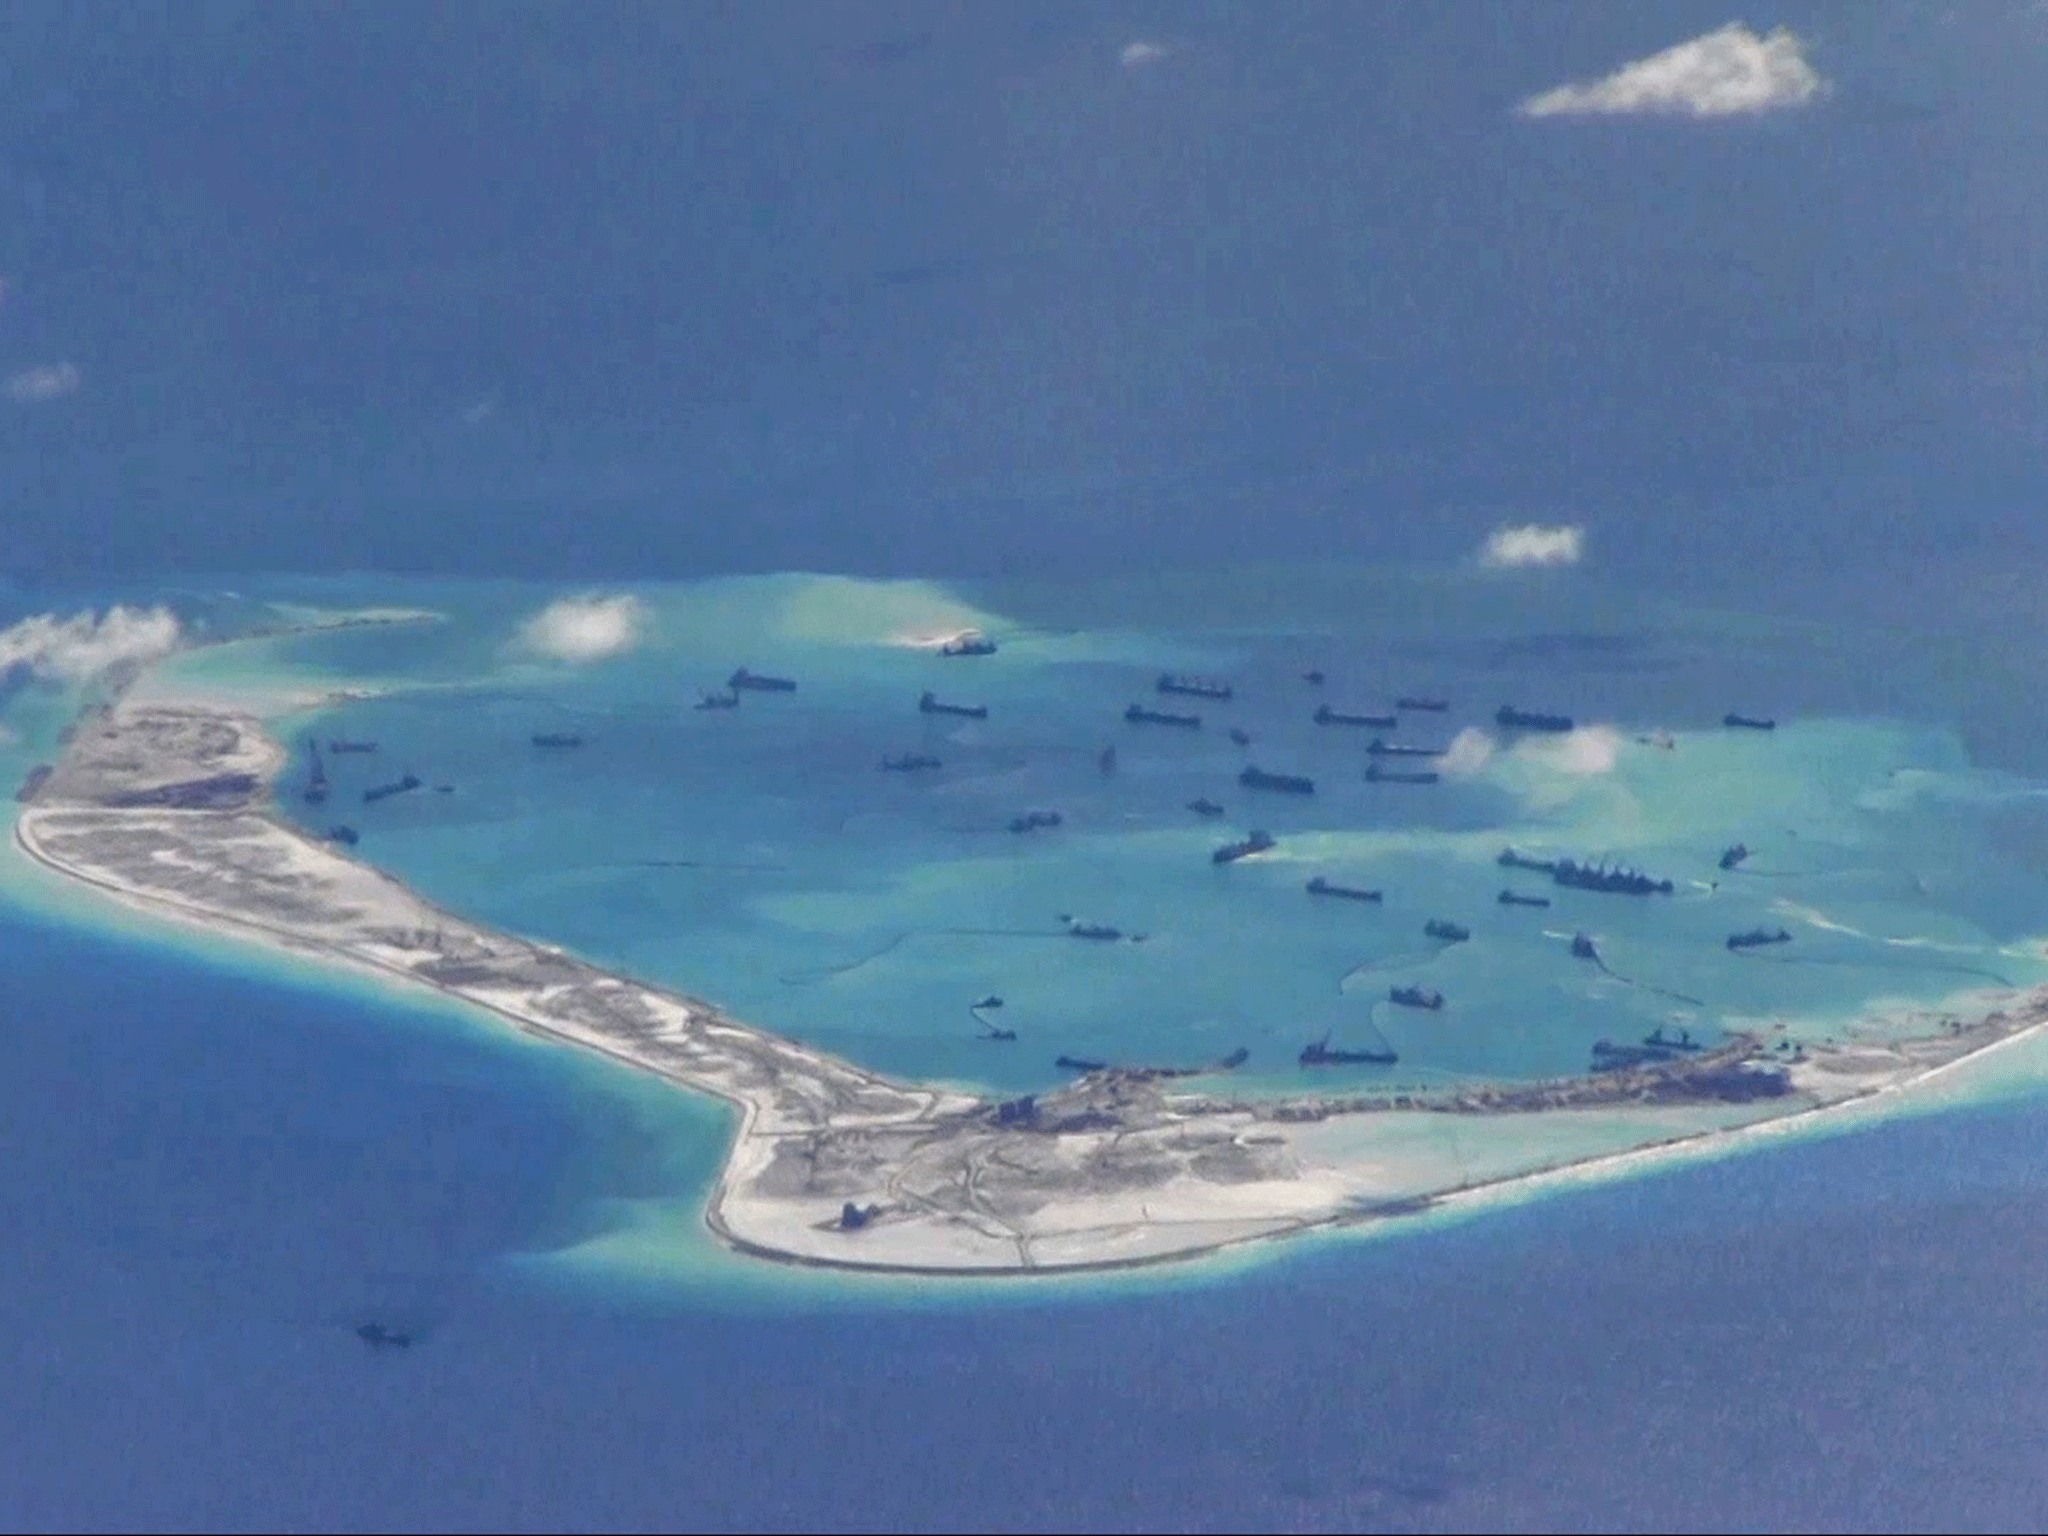 Chinese dredging vessels are purportedly seen in the waters around Mischief Reef in the disputed Spratly Islands in the South China Sea